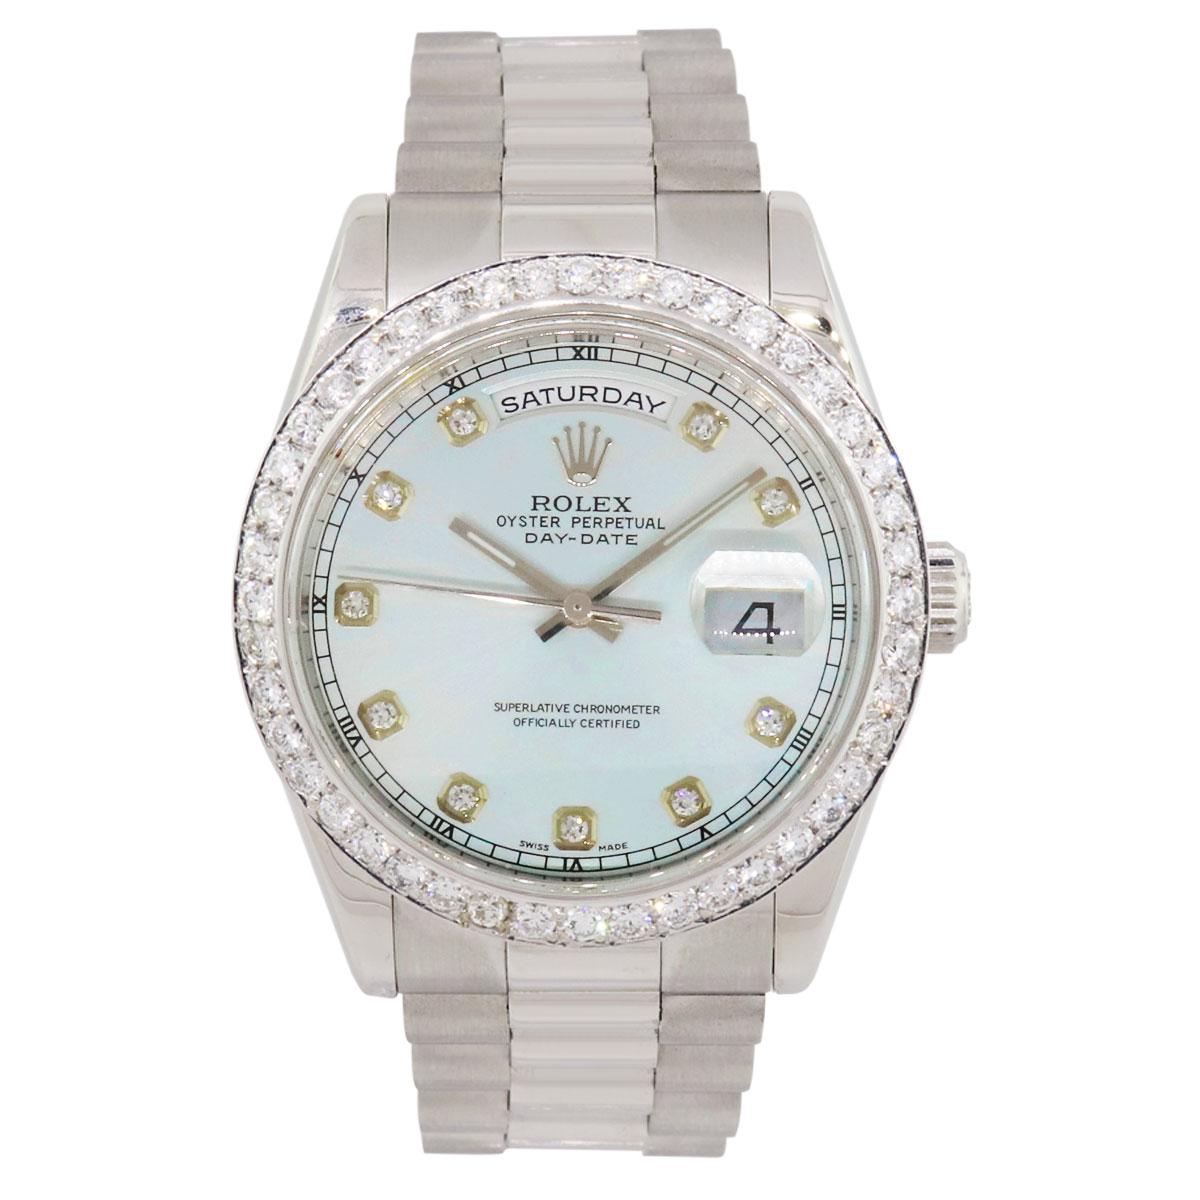 Brand: Rolex
MPN: 118206
Model: Day Date
Case Material: Platinum
Case Diameter: 36mm
Crystal: Sapphire crystal (scratch resistant)
Bezel: Round brilliant diamond bezel (aftermarket)
Dial: Ice blue dial with diamond hour markers